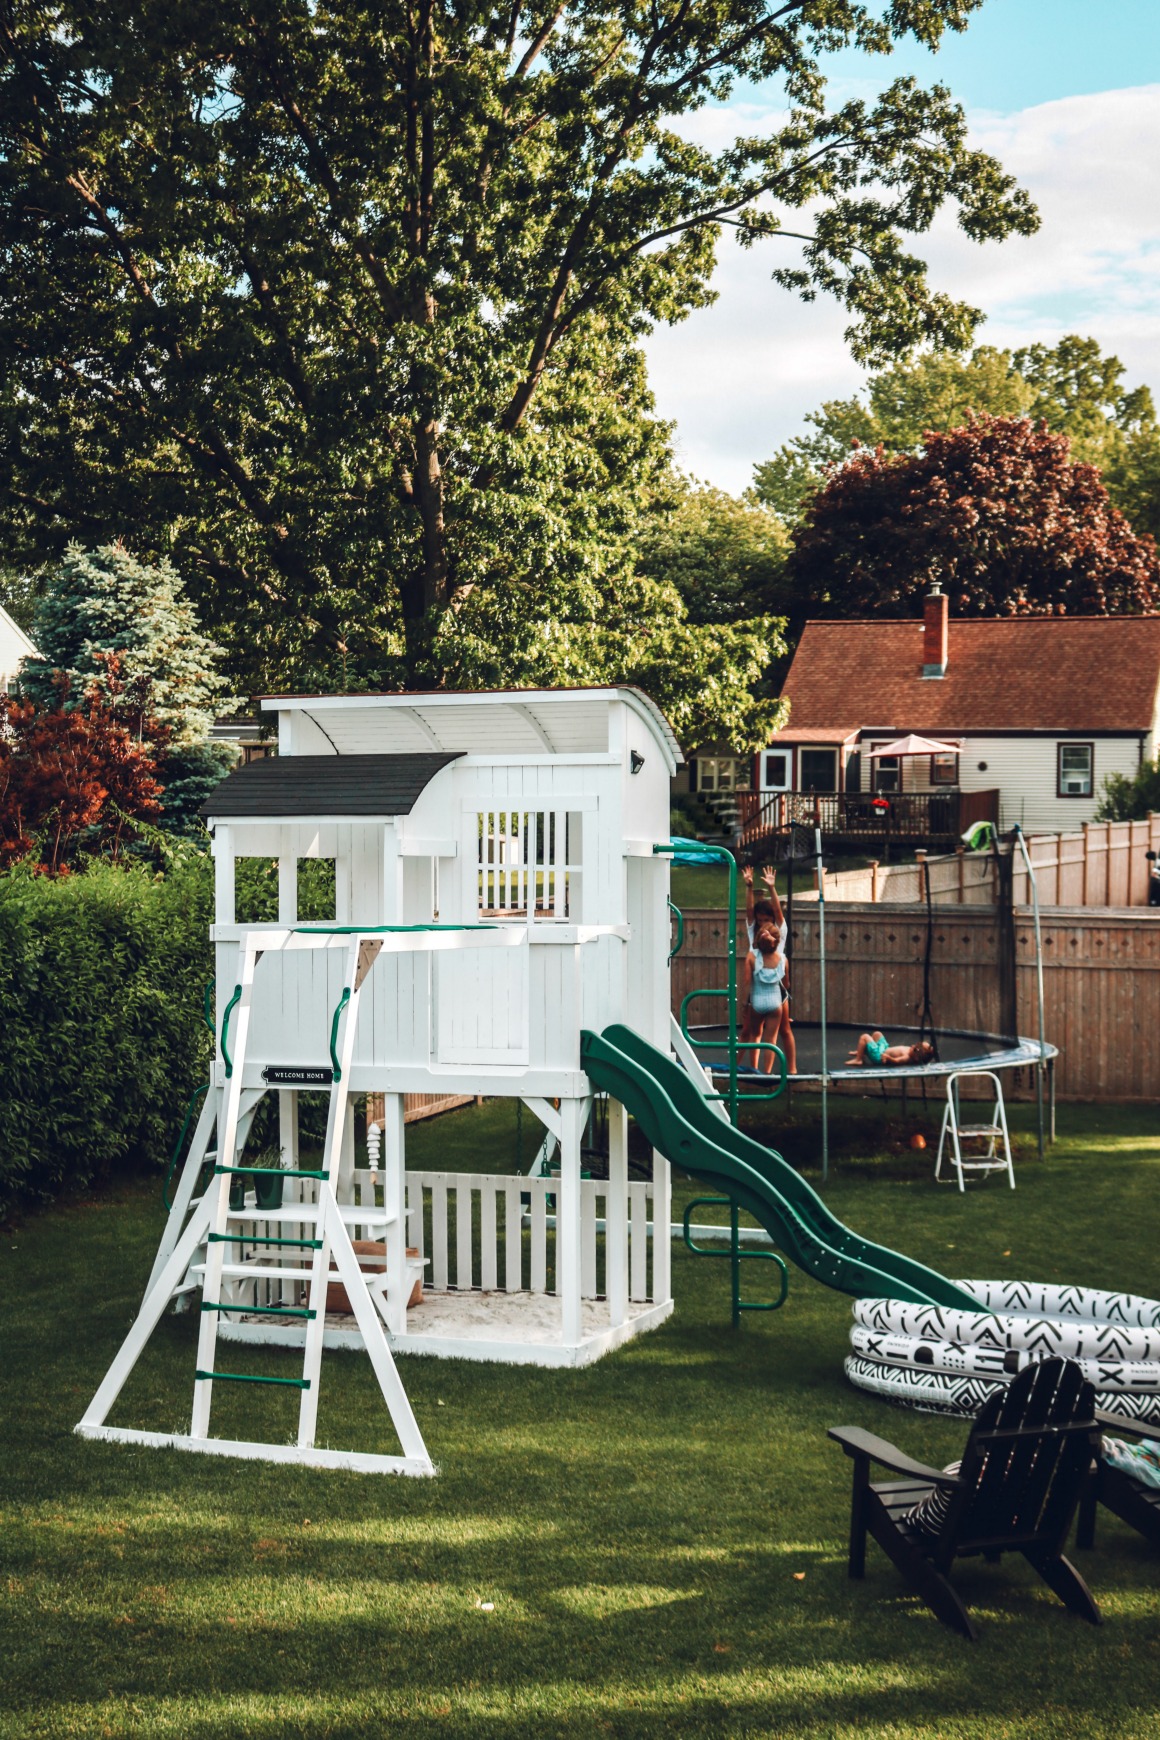 Painted White Playset